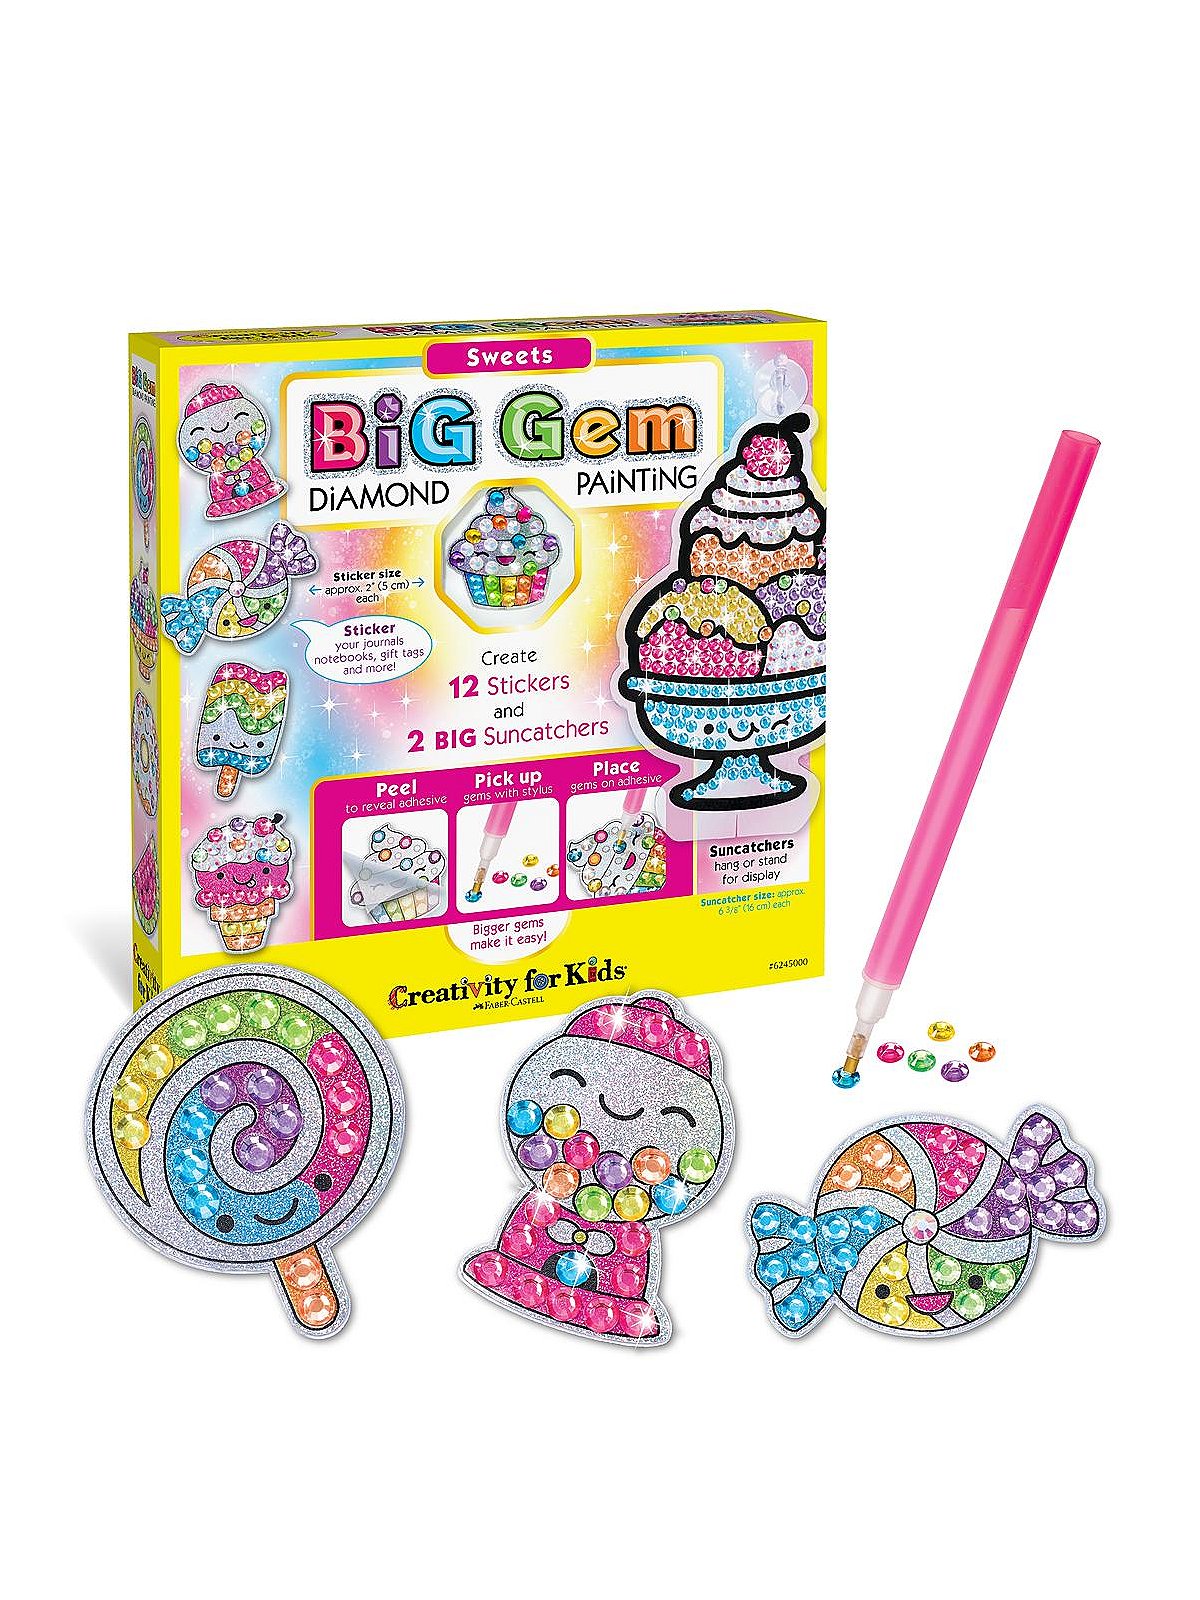 Big Gem Diamond Painting Craft Kit for Kids, Stickers and